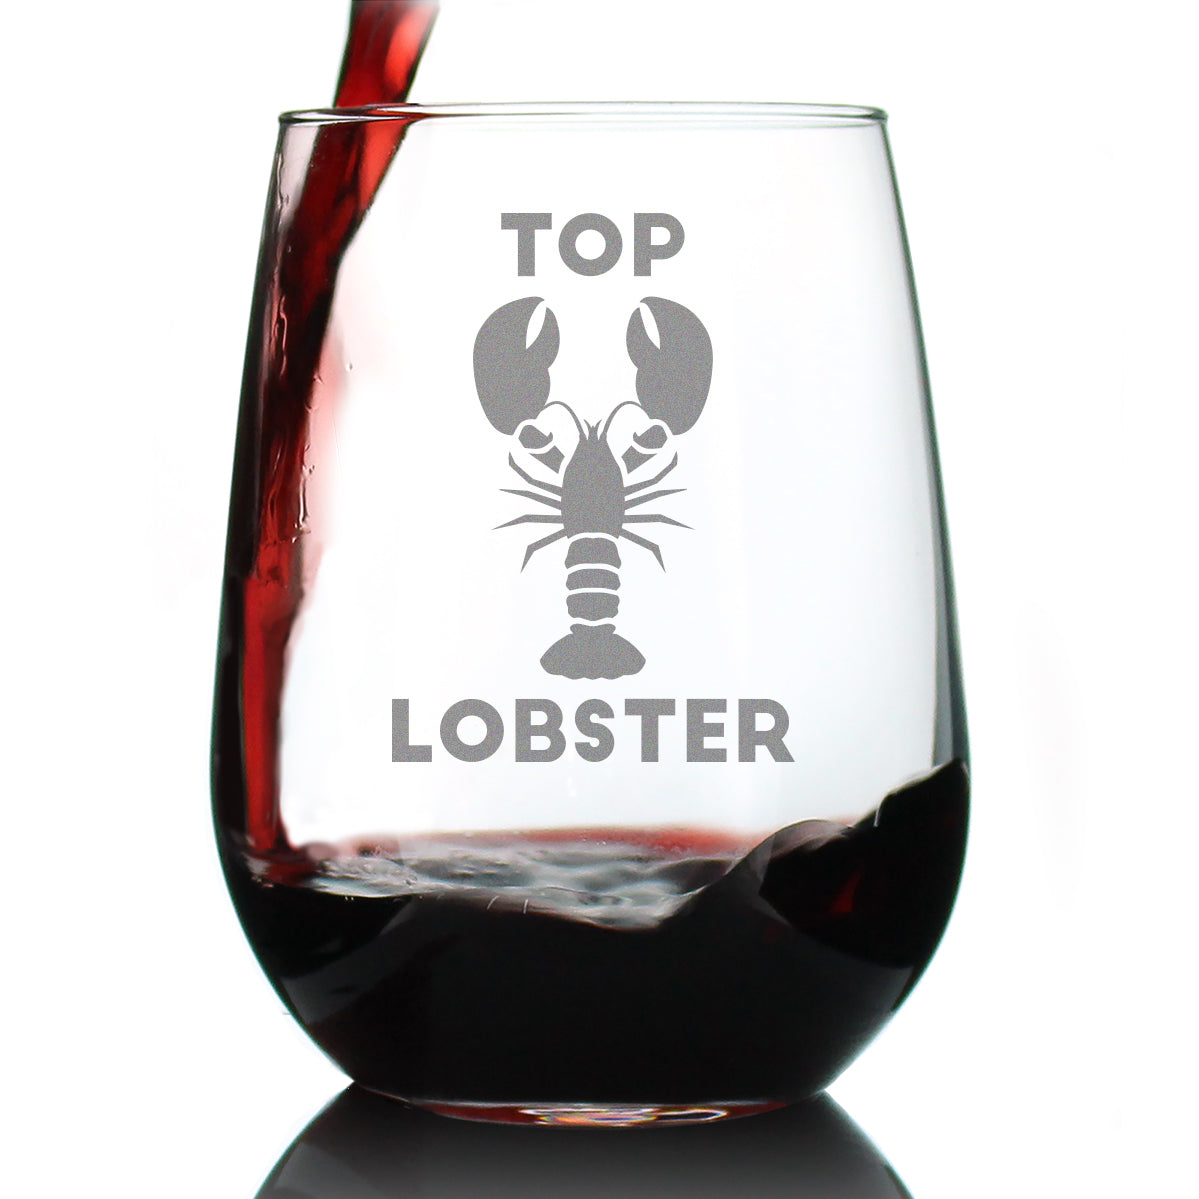 Top Lobster – Cute Funny Stemless Wine Glass, Large 17 Ounces, Etched Sayings, Gift Box